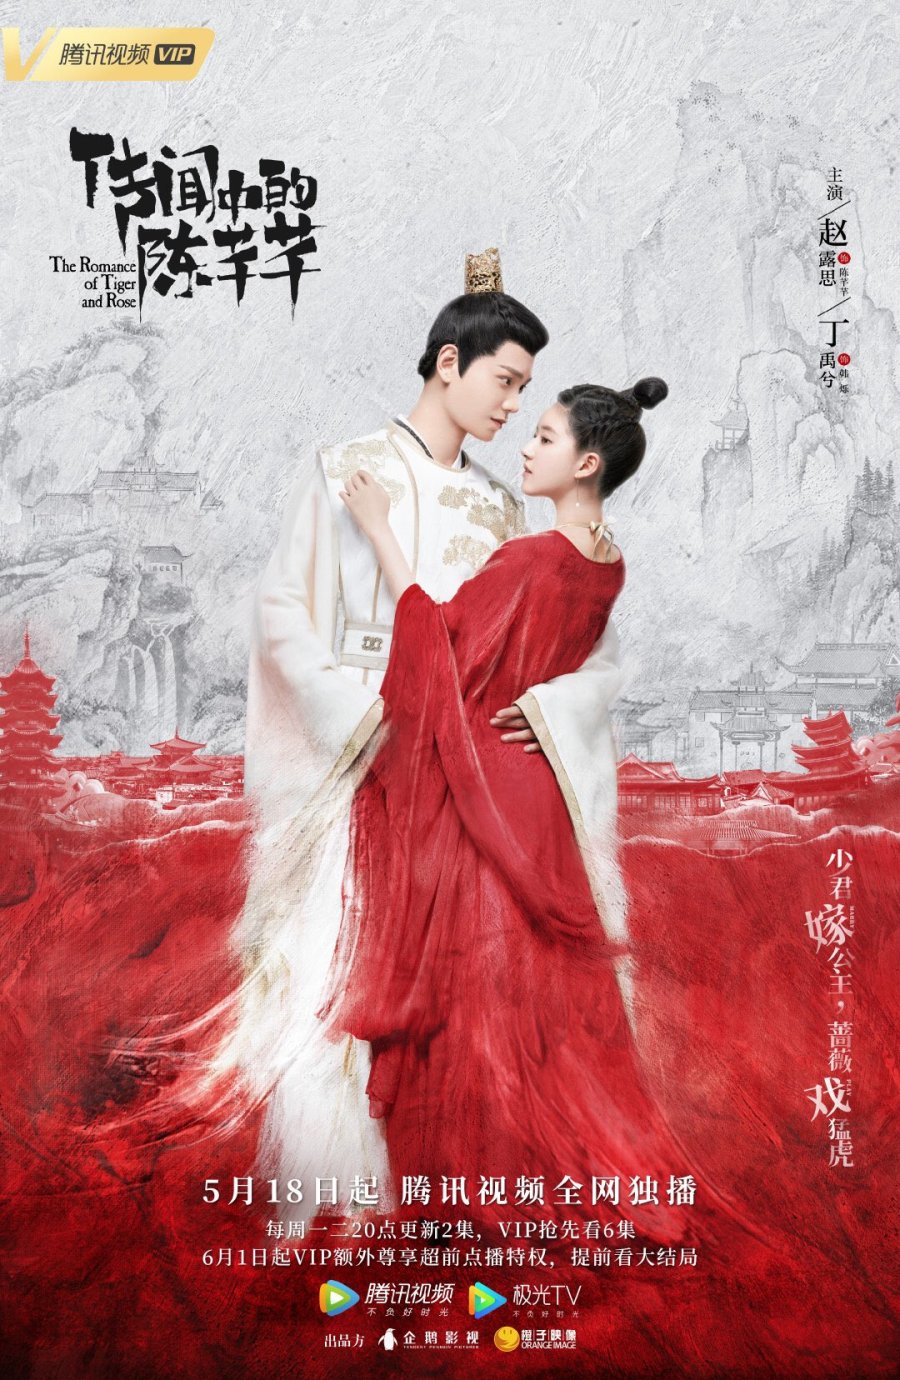 image poster from imdb - ​The Romance of Tiger and Rose (2020)